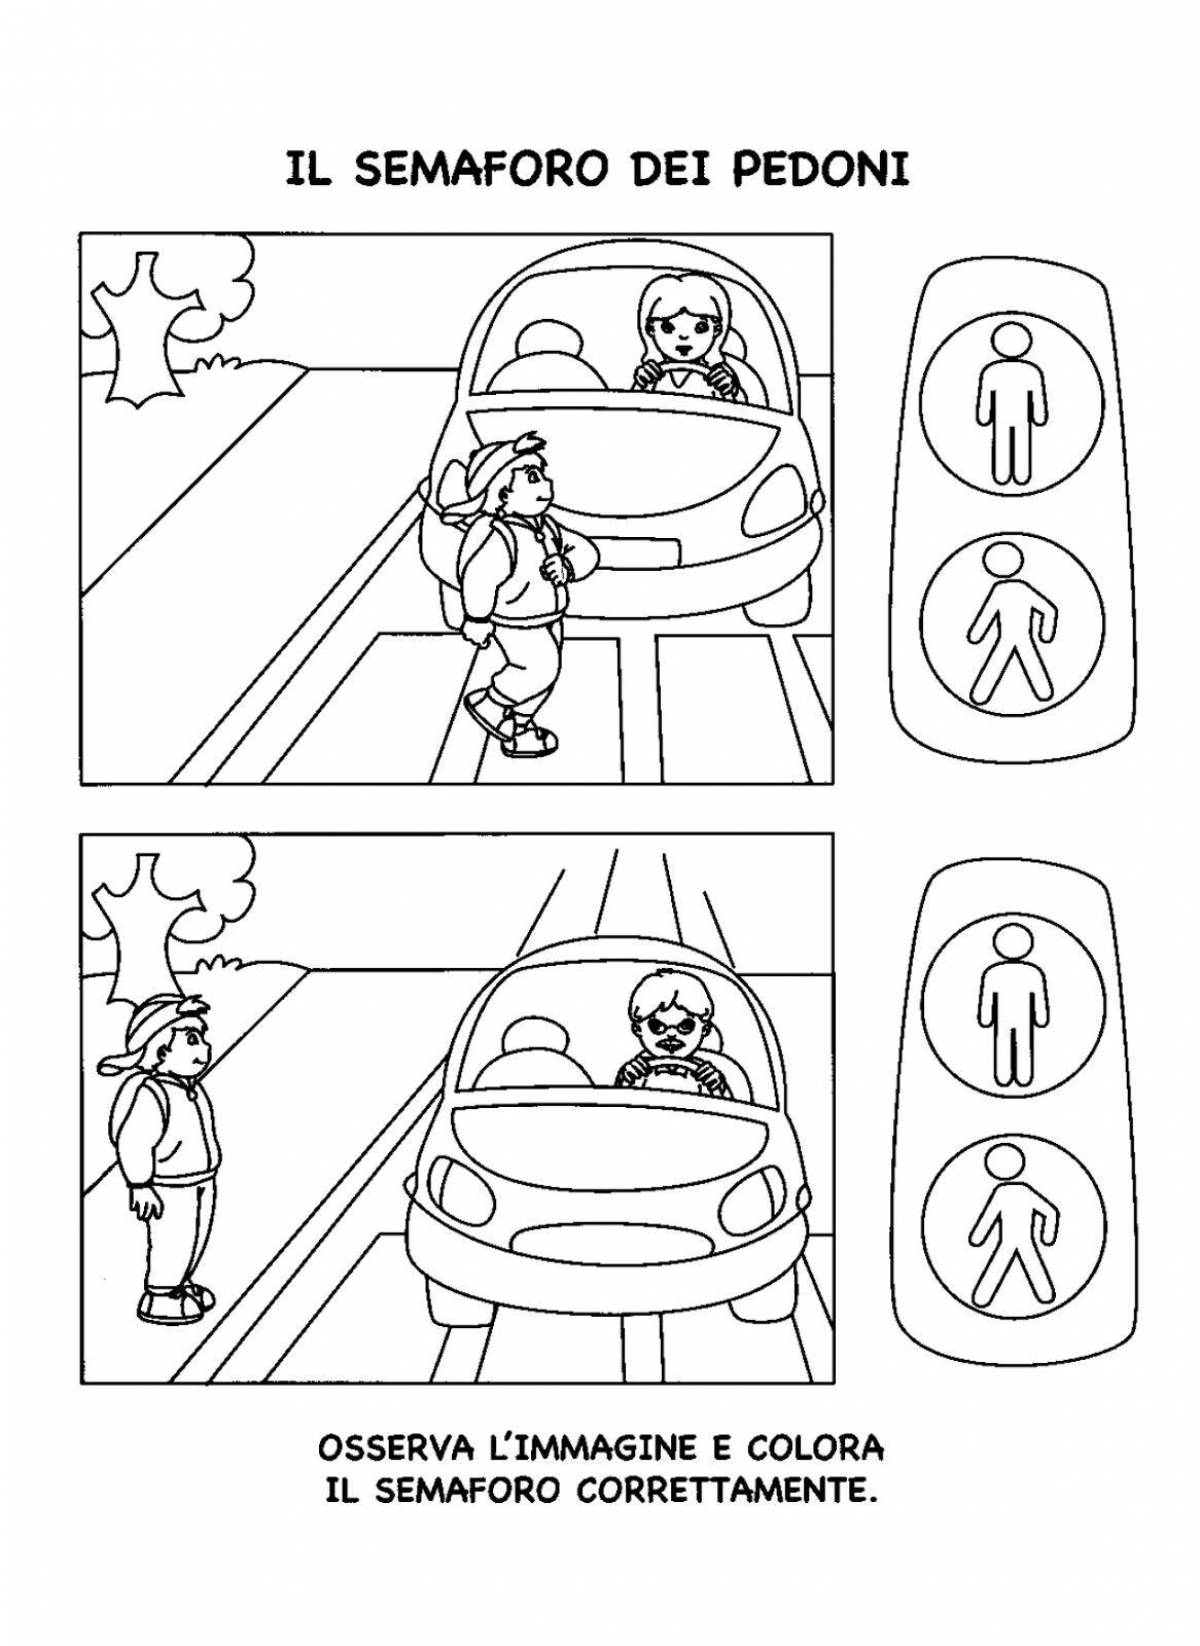 Coloring book funny rules of the road